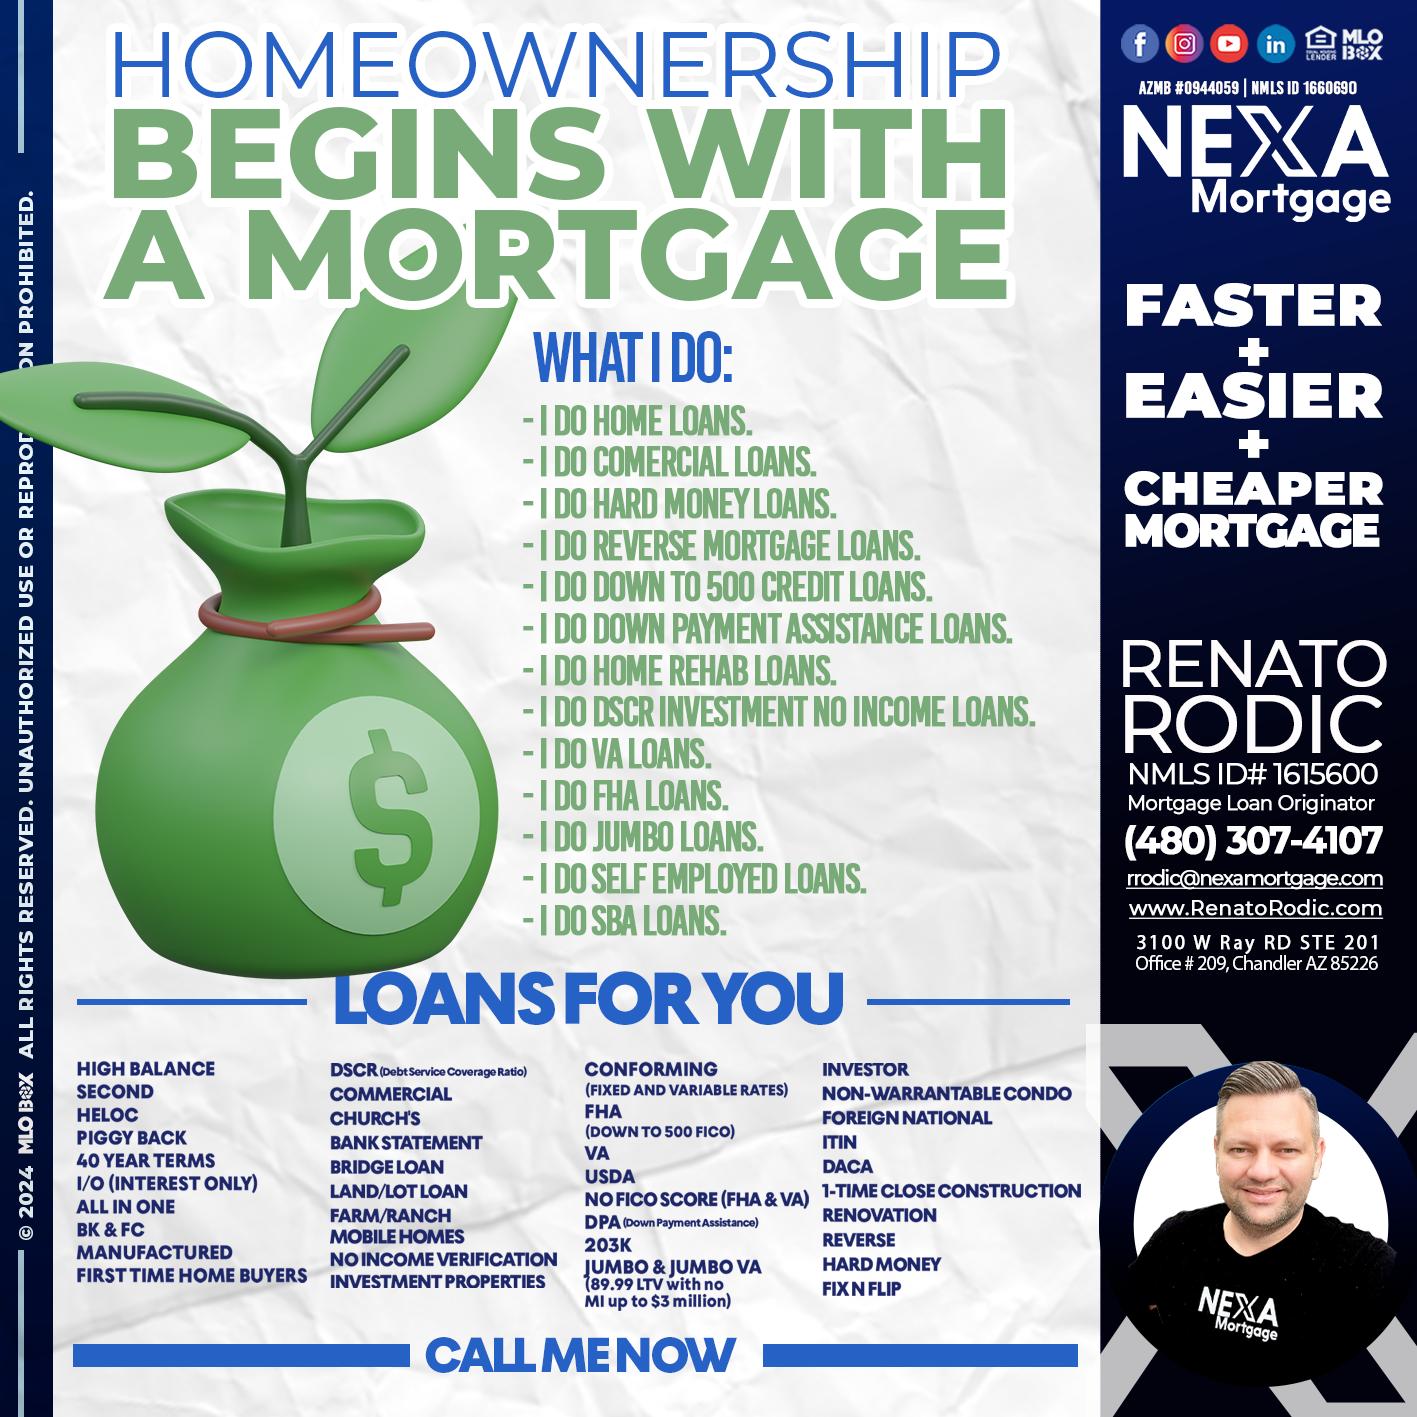 HOME OWNERSHIP